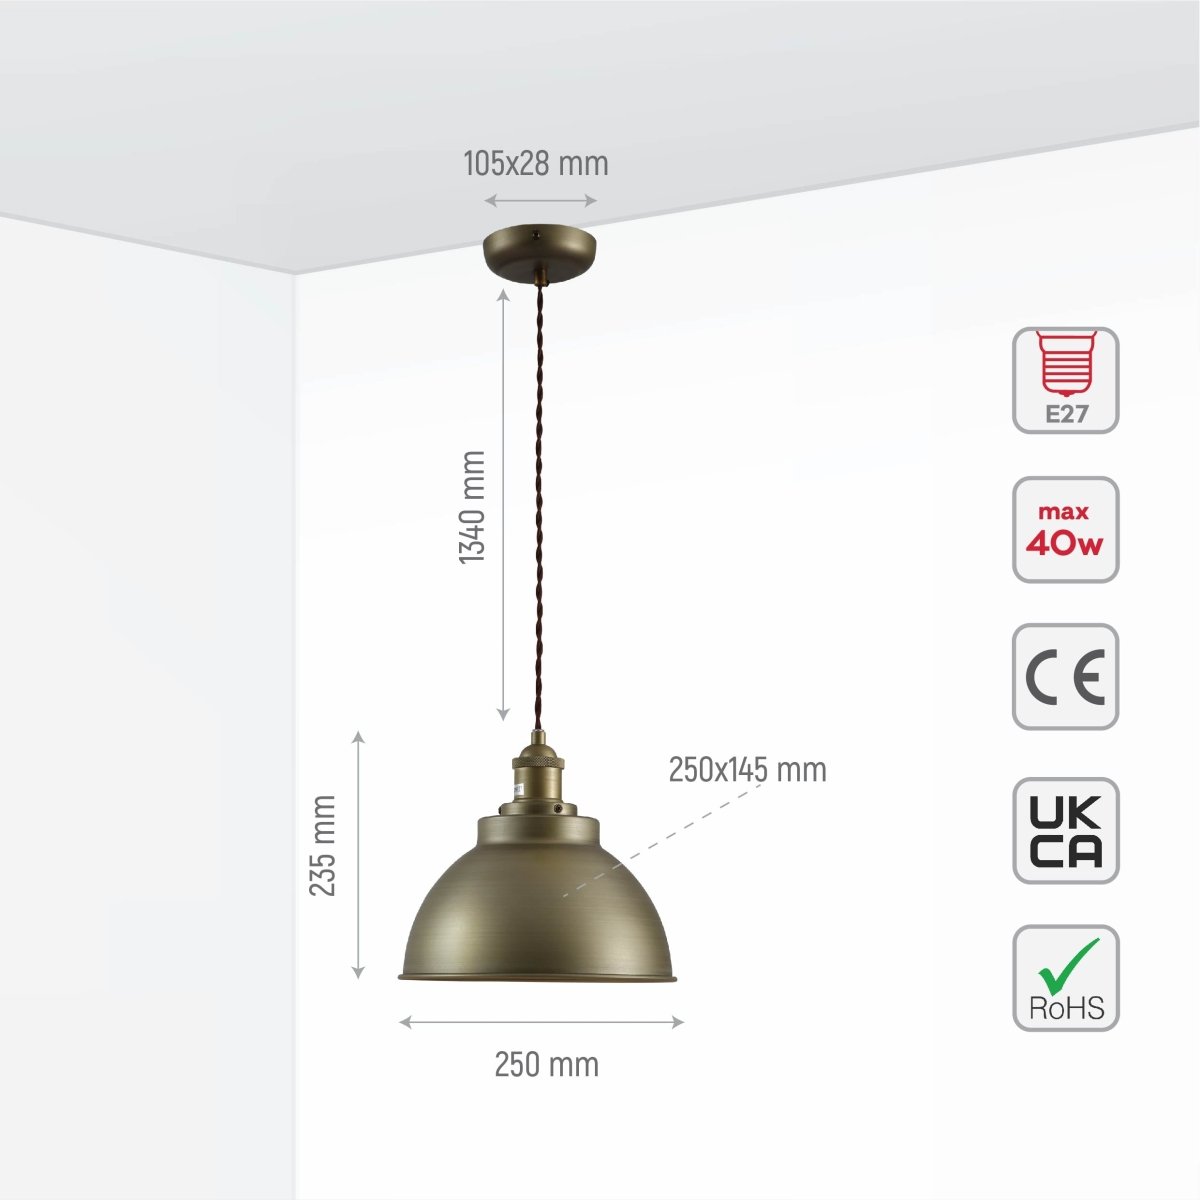 Size and specs of Brooklyn Vintage Metal Dome Pendant Light Pewter Copper  Bronze E27  | TEKLED 150-18205